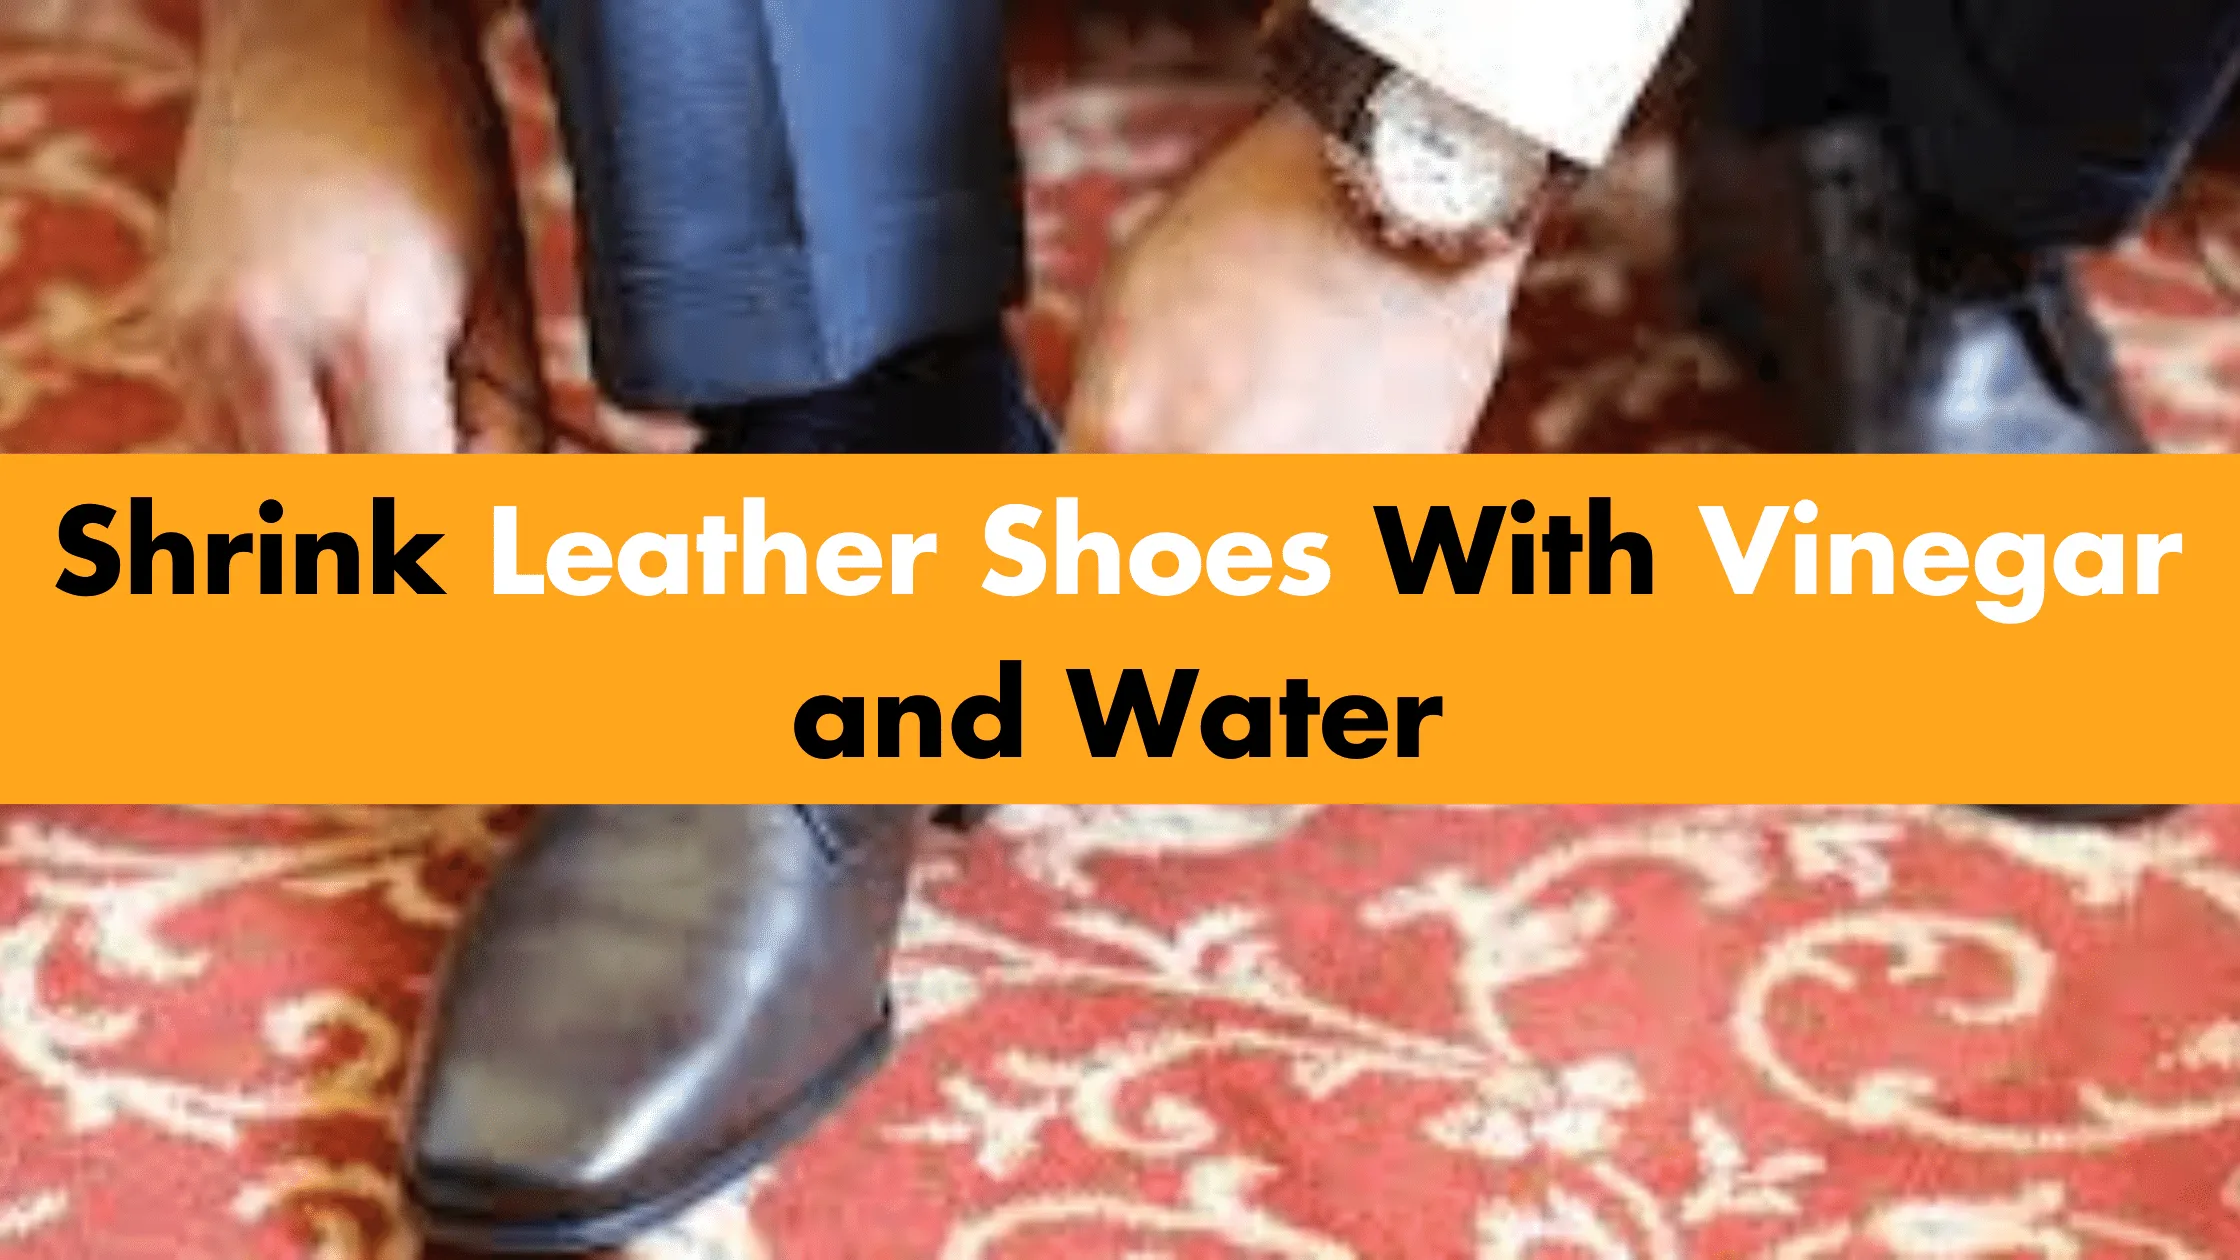 Shrink Leather Shoes With Vinegar and Water